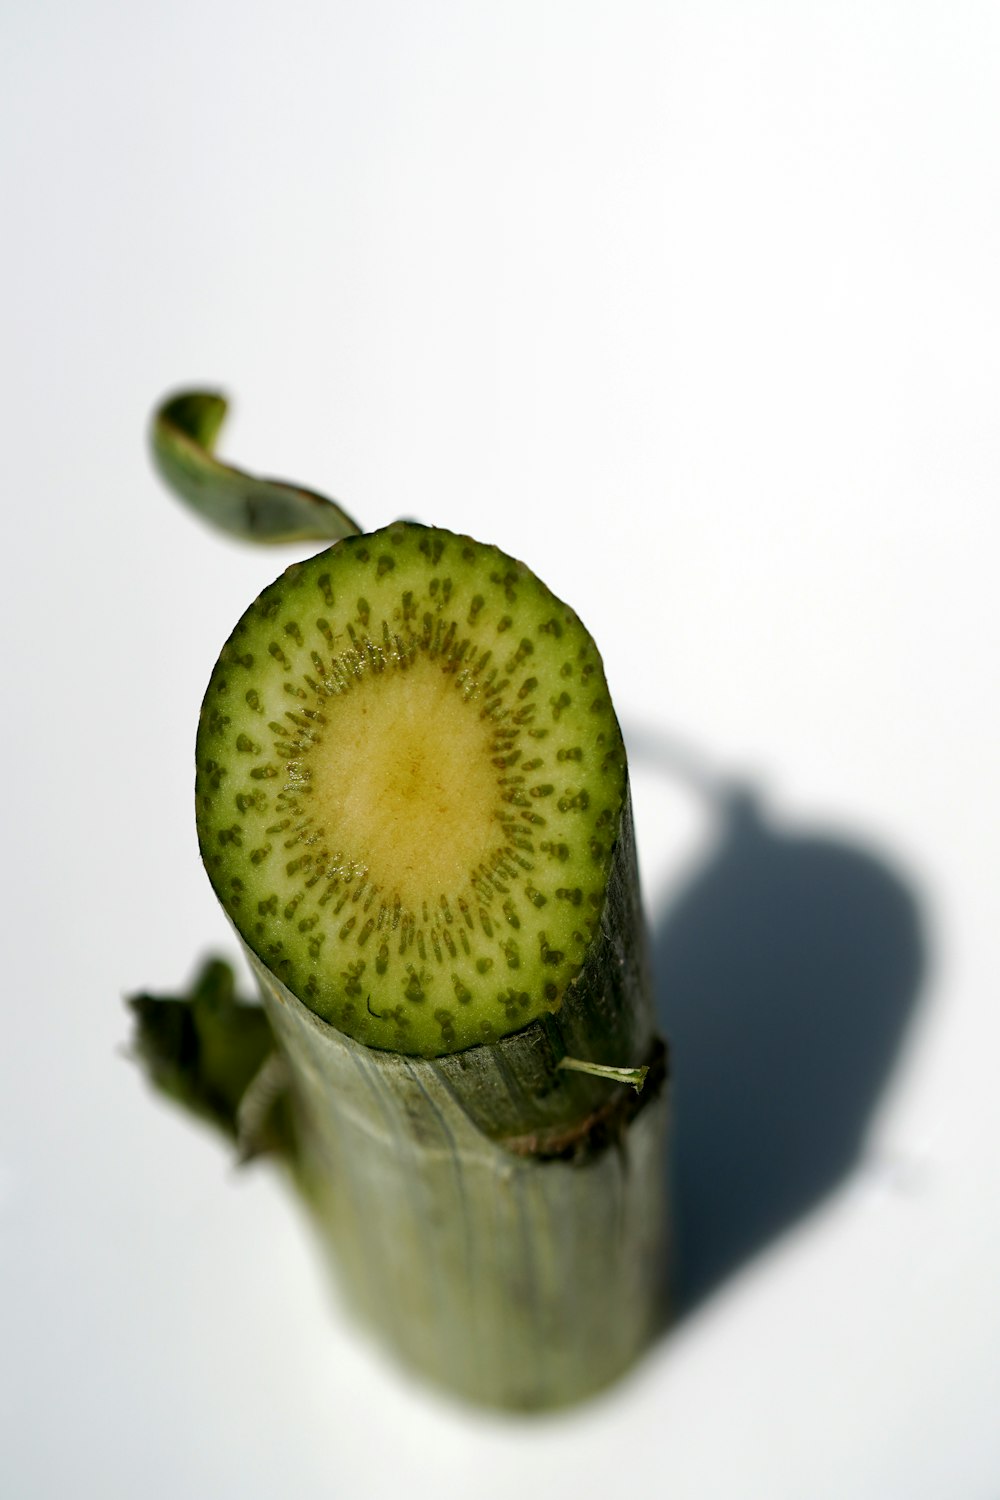 a close up of a cucumber on a white surface